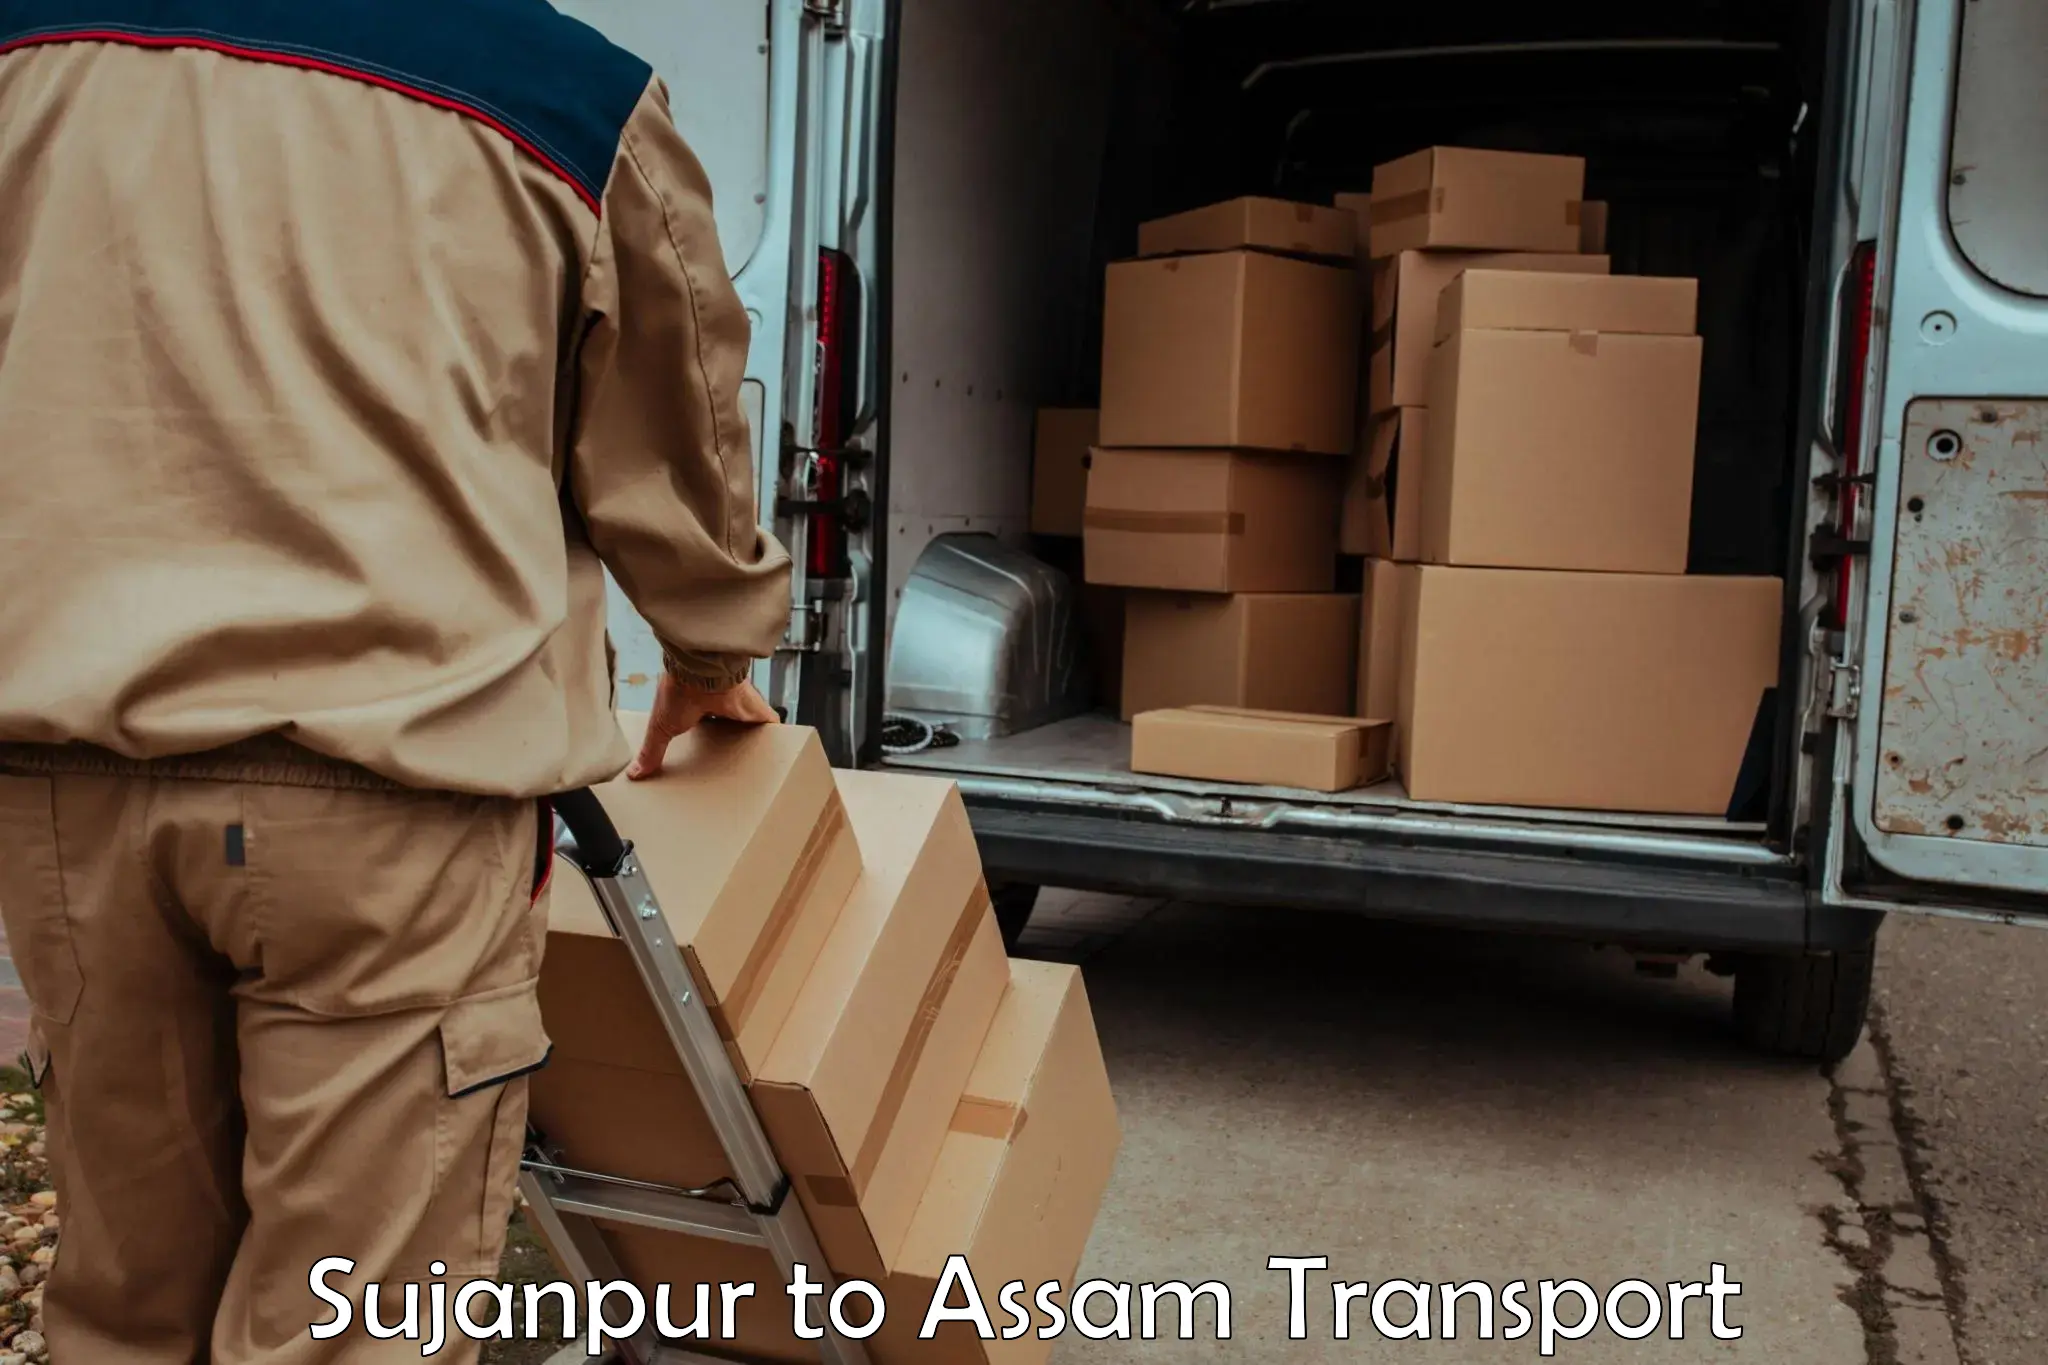 Daily parcel service transport Sujanpur to Dibrugarh University